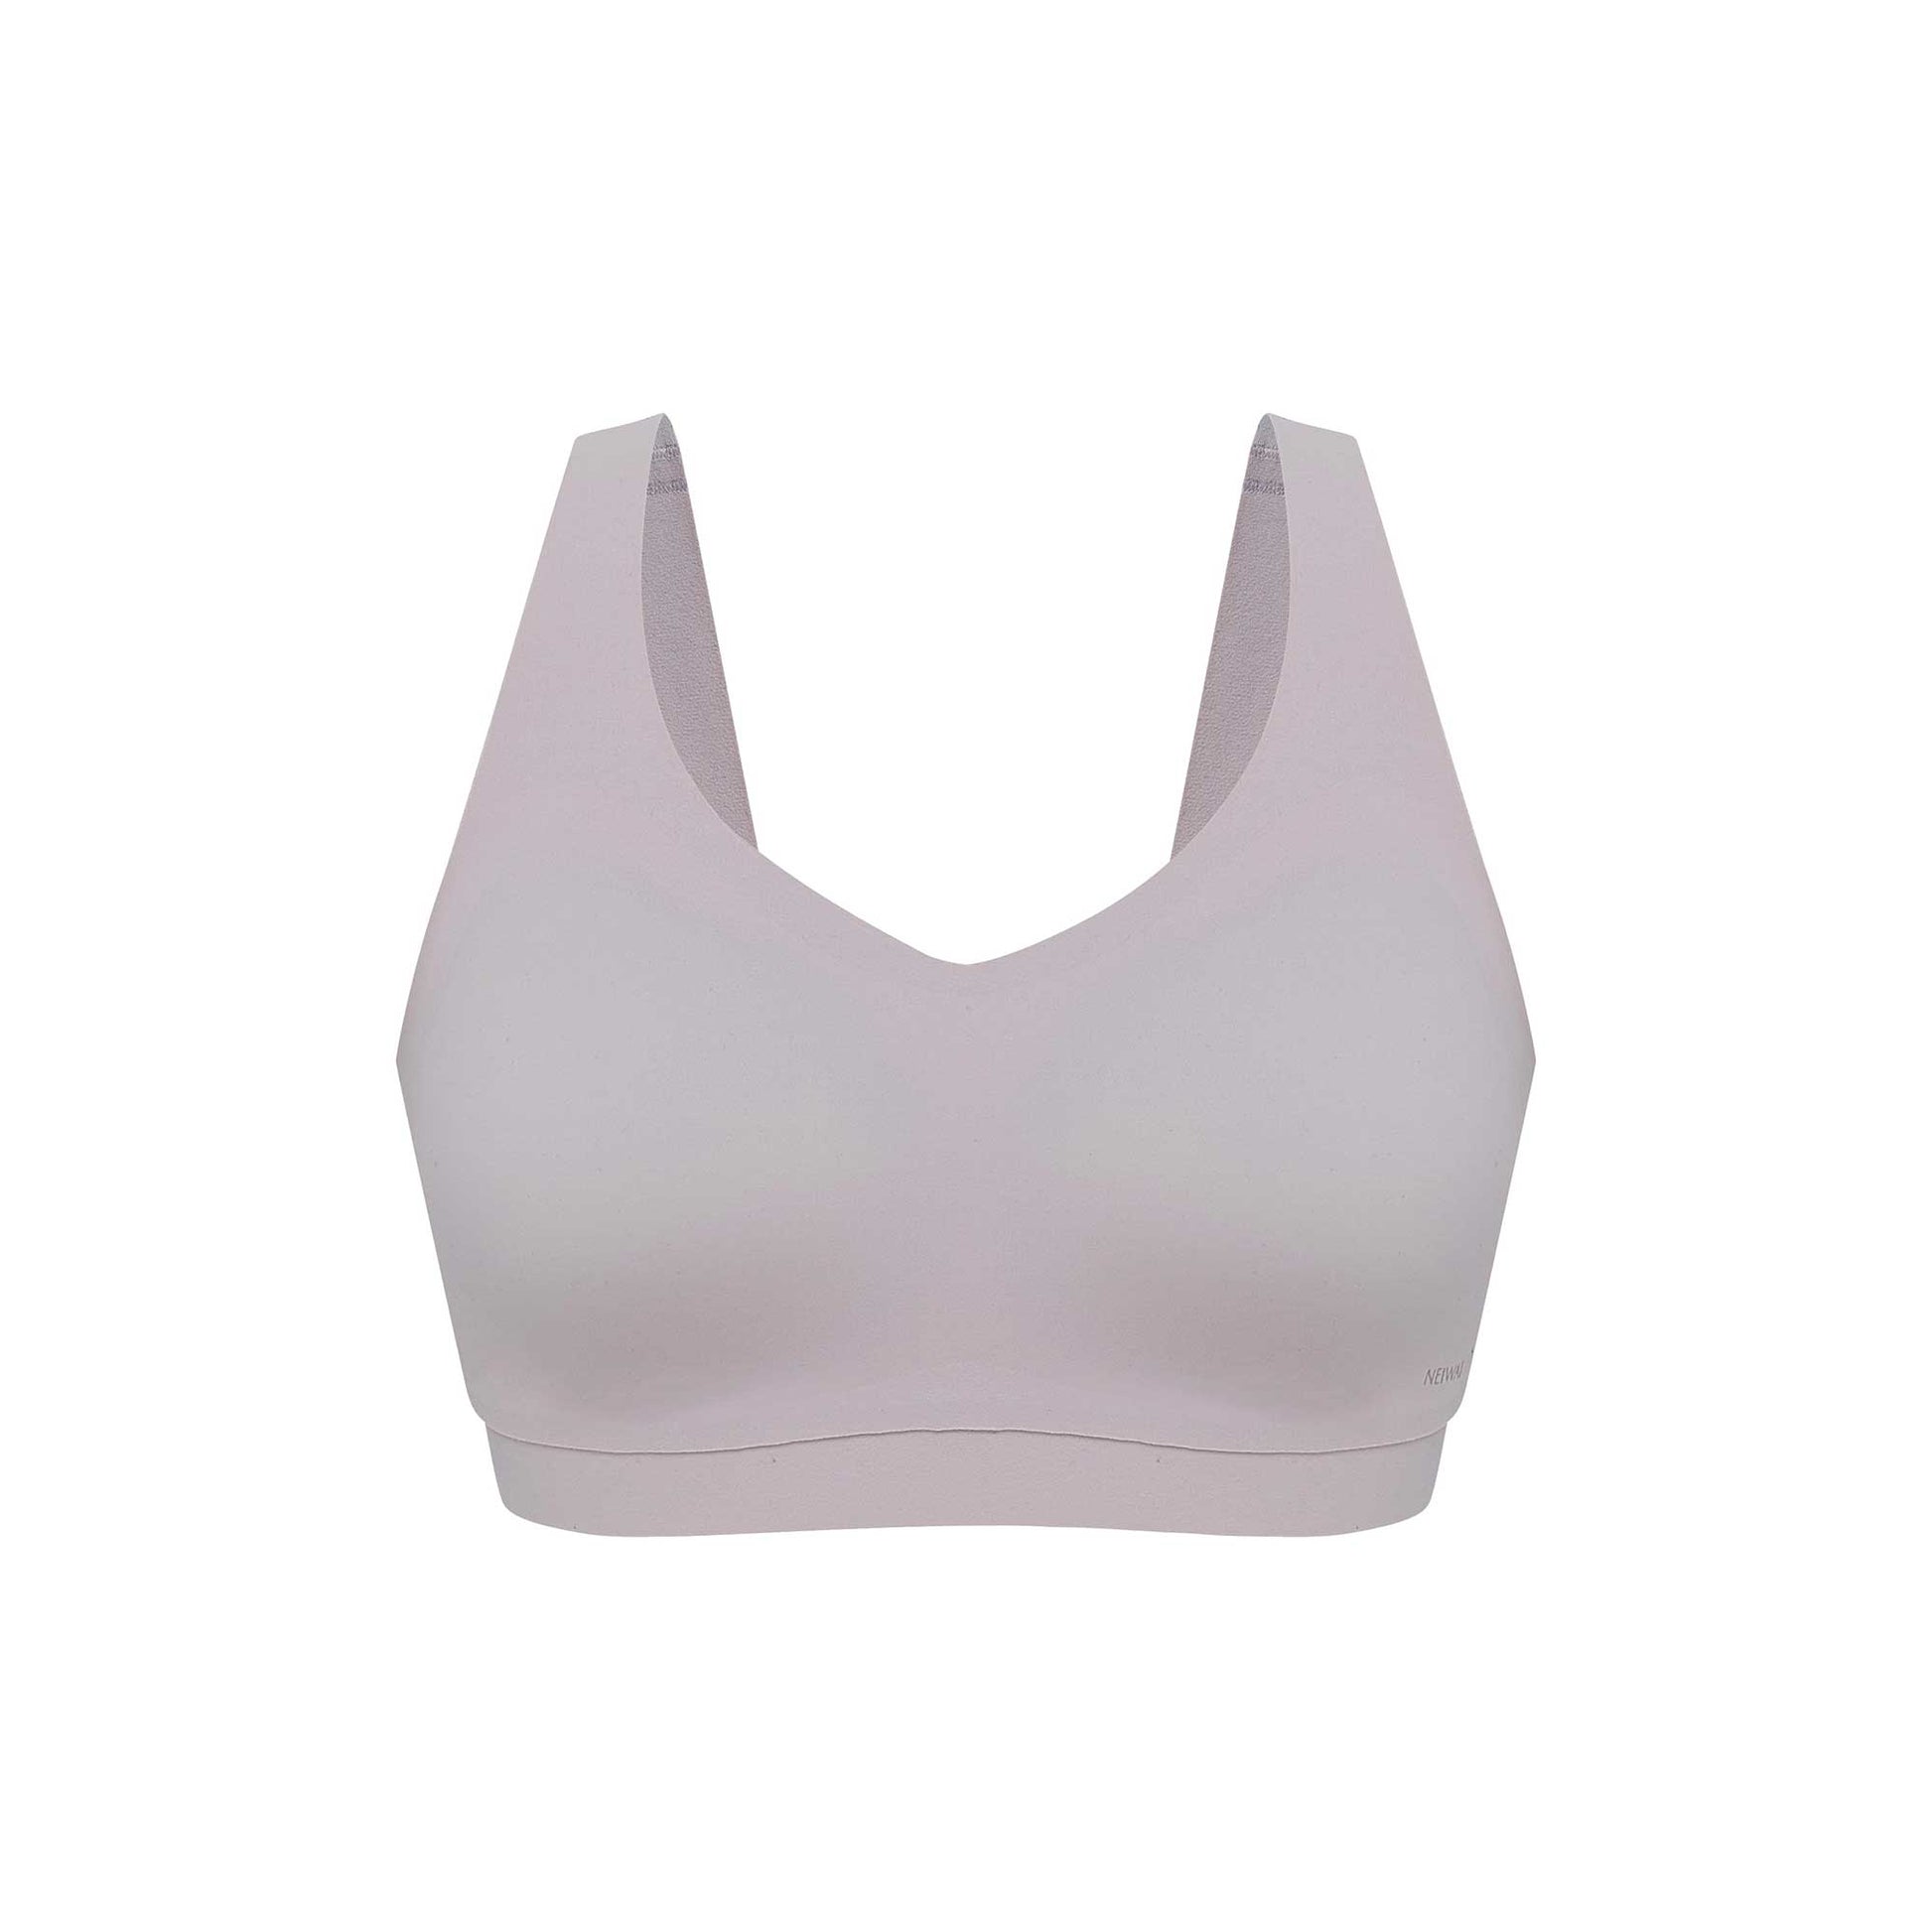 The Ultimate NEIWAI Review: Honest thoughts about Barely Zero Bras